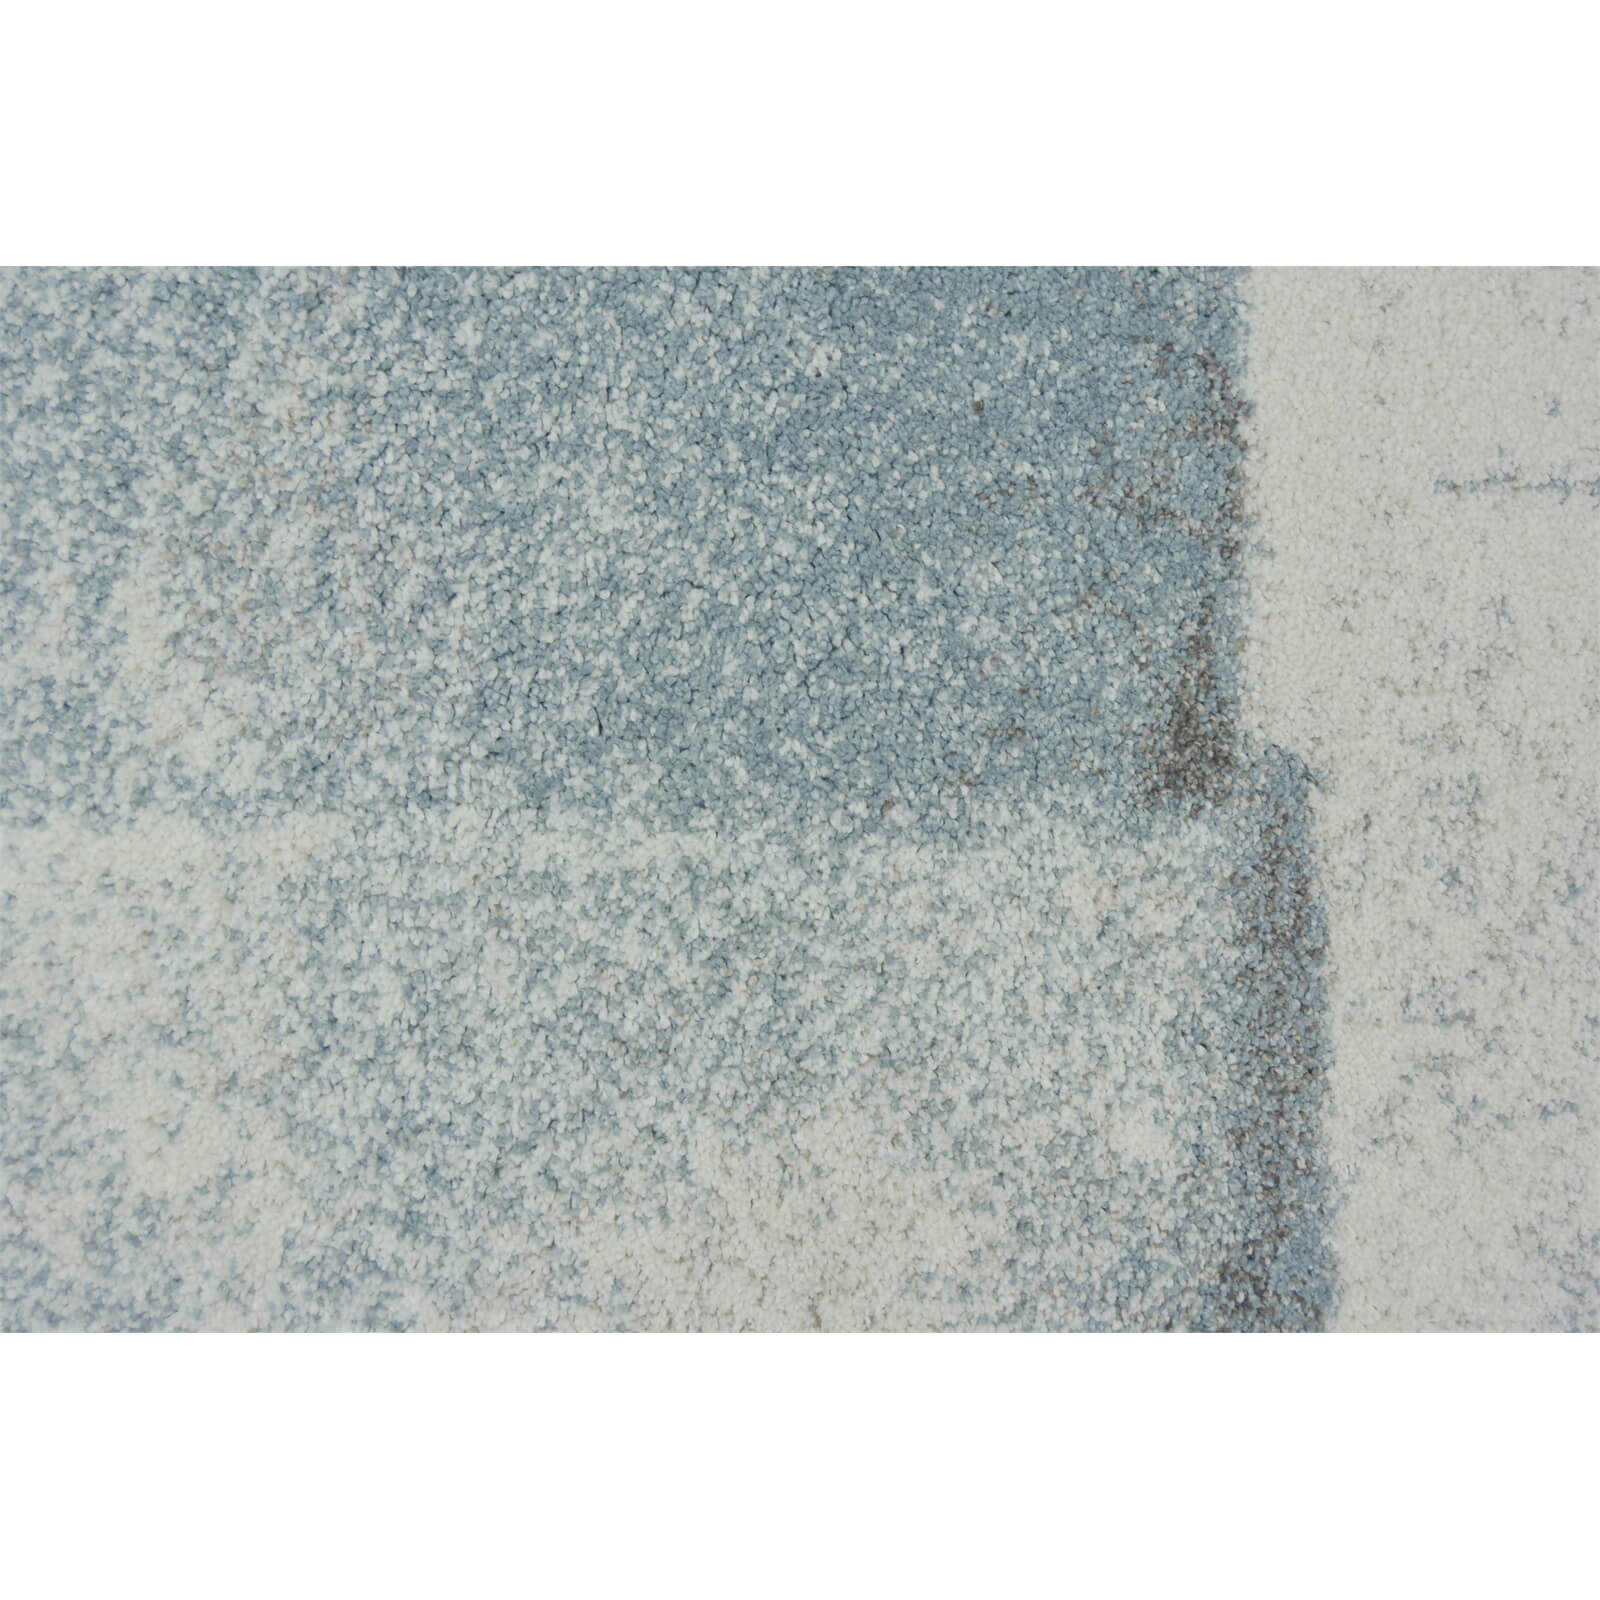 Mirage Abstract Blue Rug - 120 x 170cm